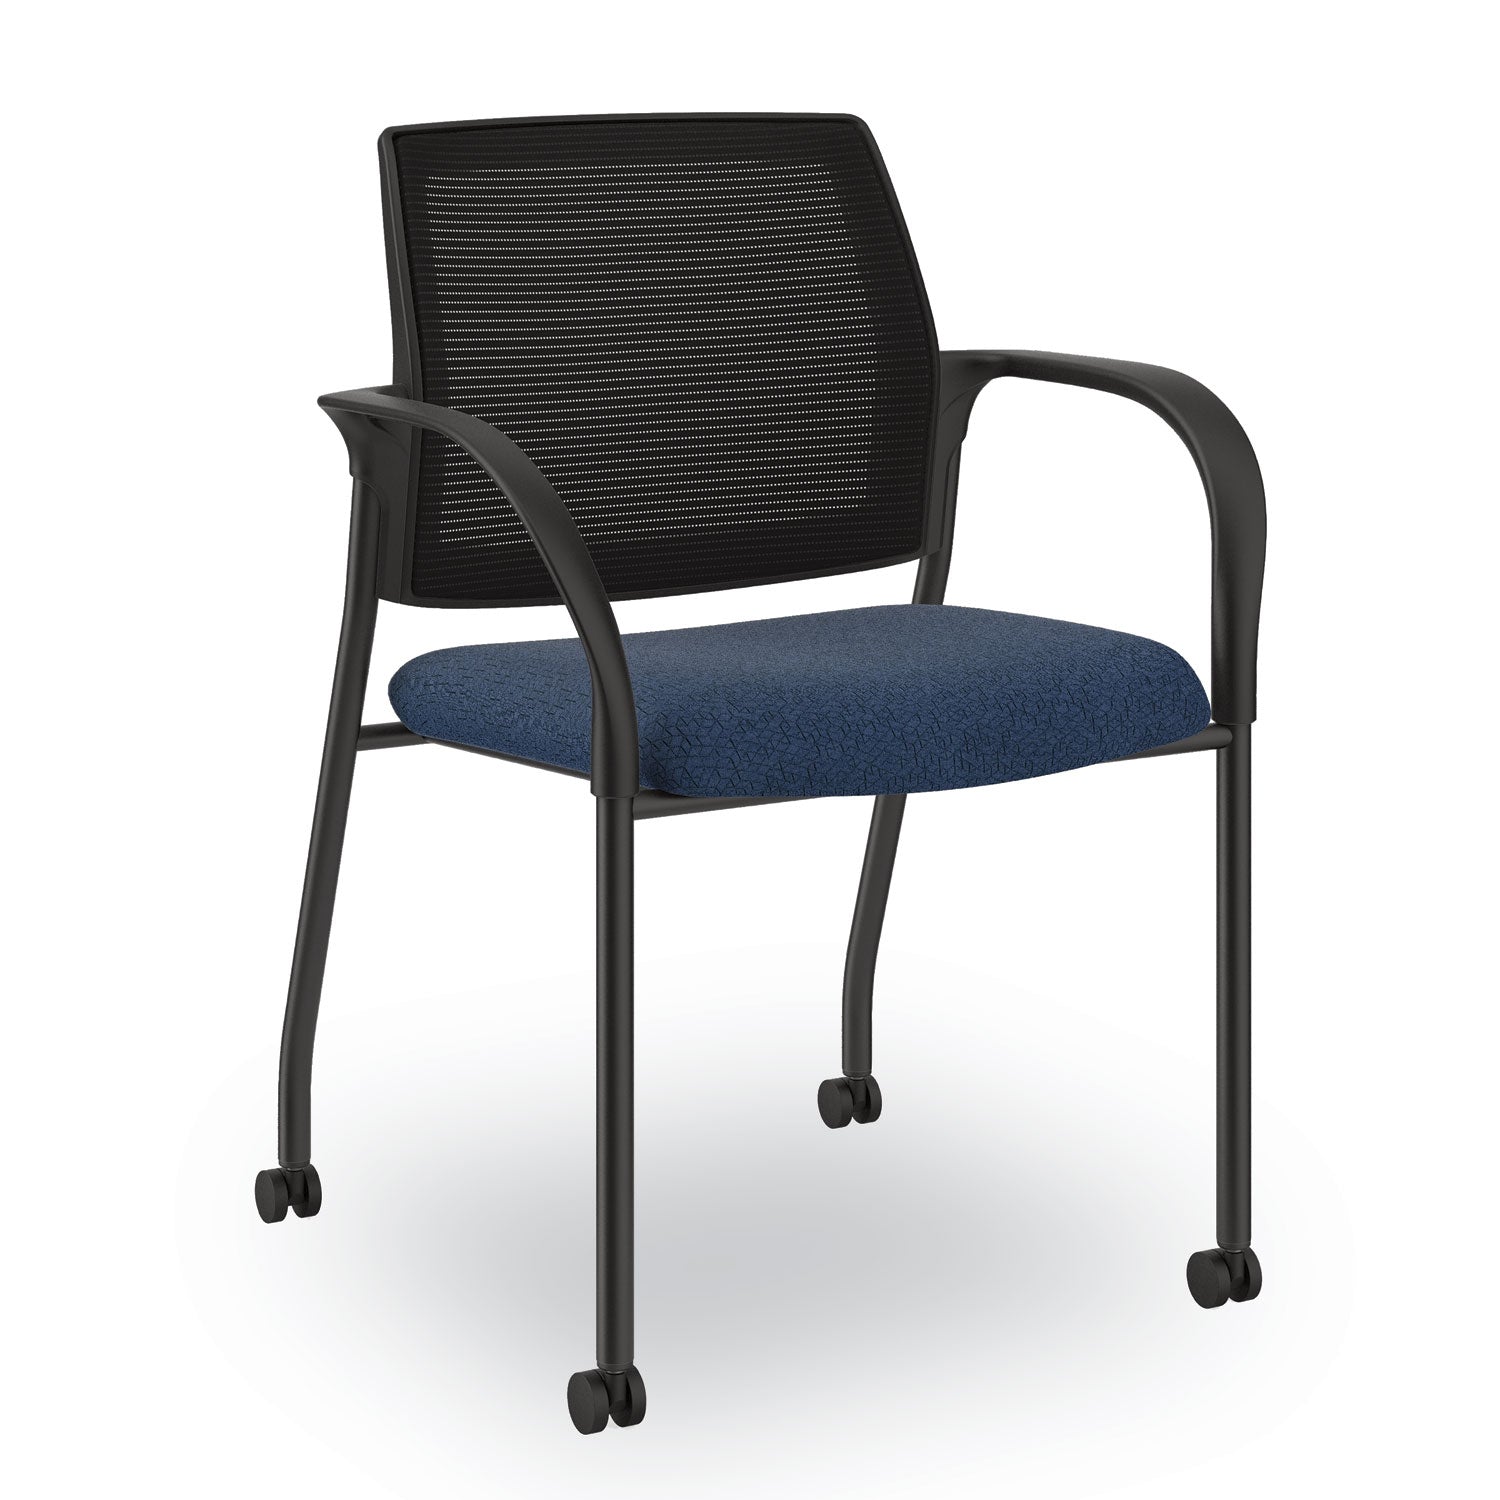 ignition-series-guest-chair-with-arms-25-x-2175-x-335-navy-seat-black-back-black-base-ships-in-7-10-business-days_honis107imapx13 - 1